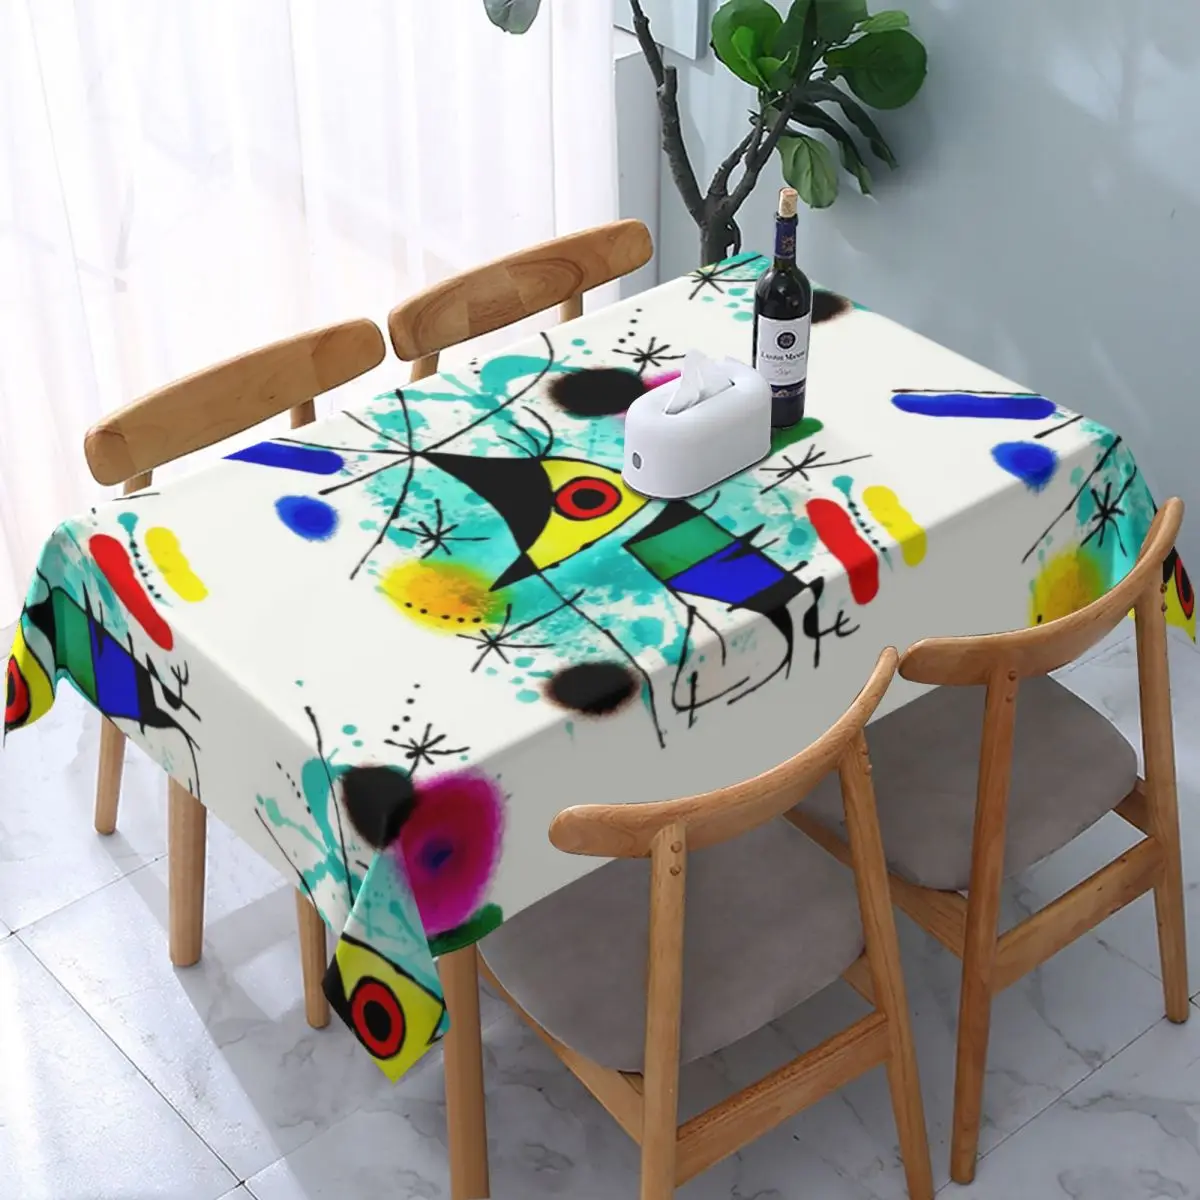 

Joan Miro Tablecloth Rectangular Elastic Fitted Waterproof Abstract Surrealism Table Cloth Cover for Dining Room